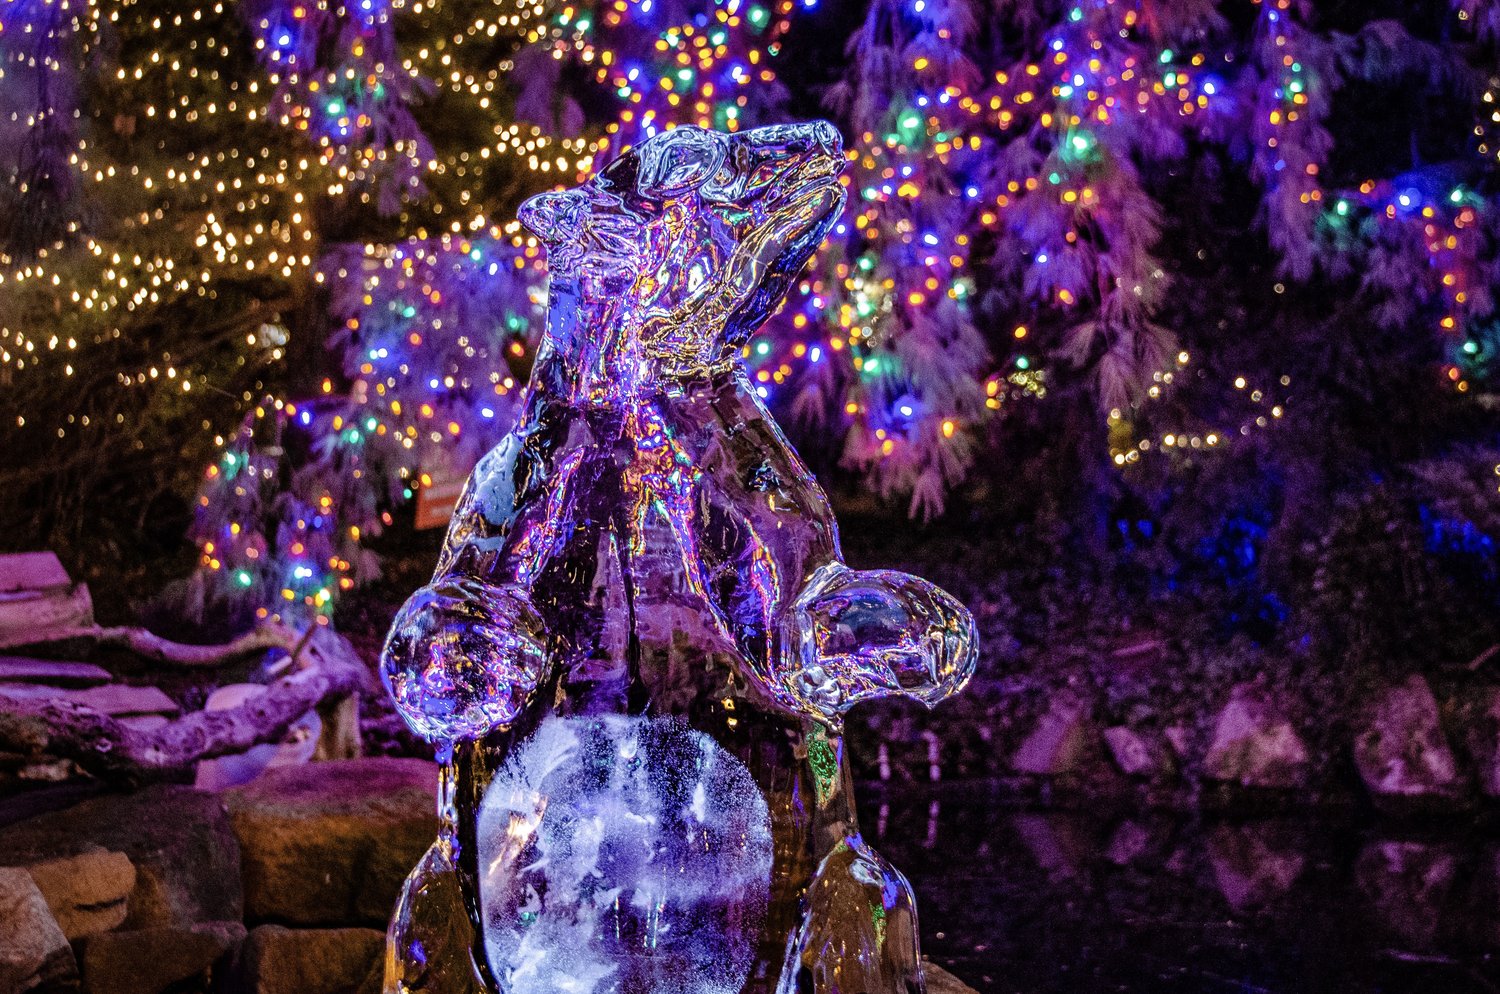 Ice sculptures will be featured during the Fire & Frost Fun weekends at Peddler’s Village.